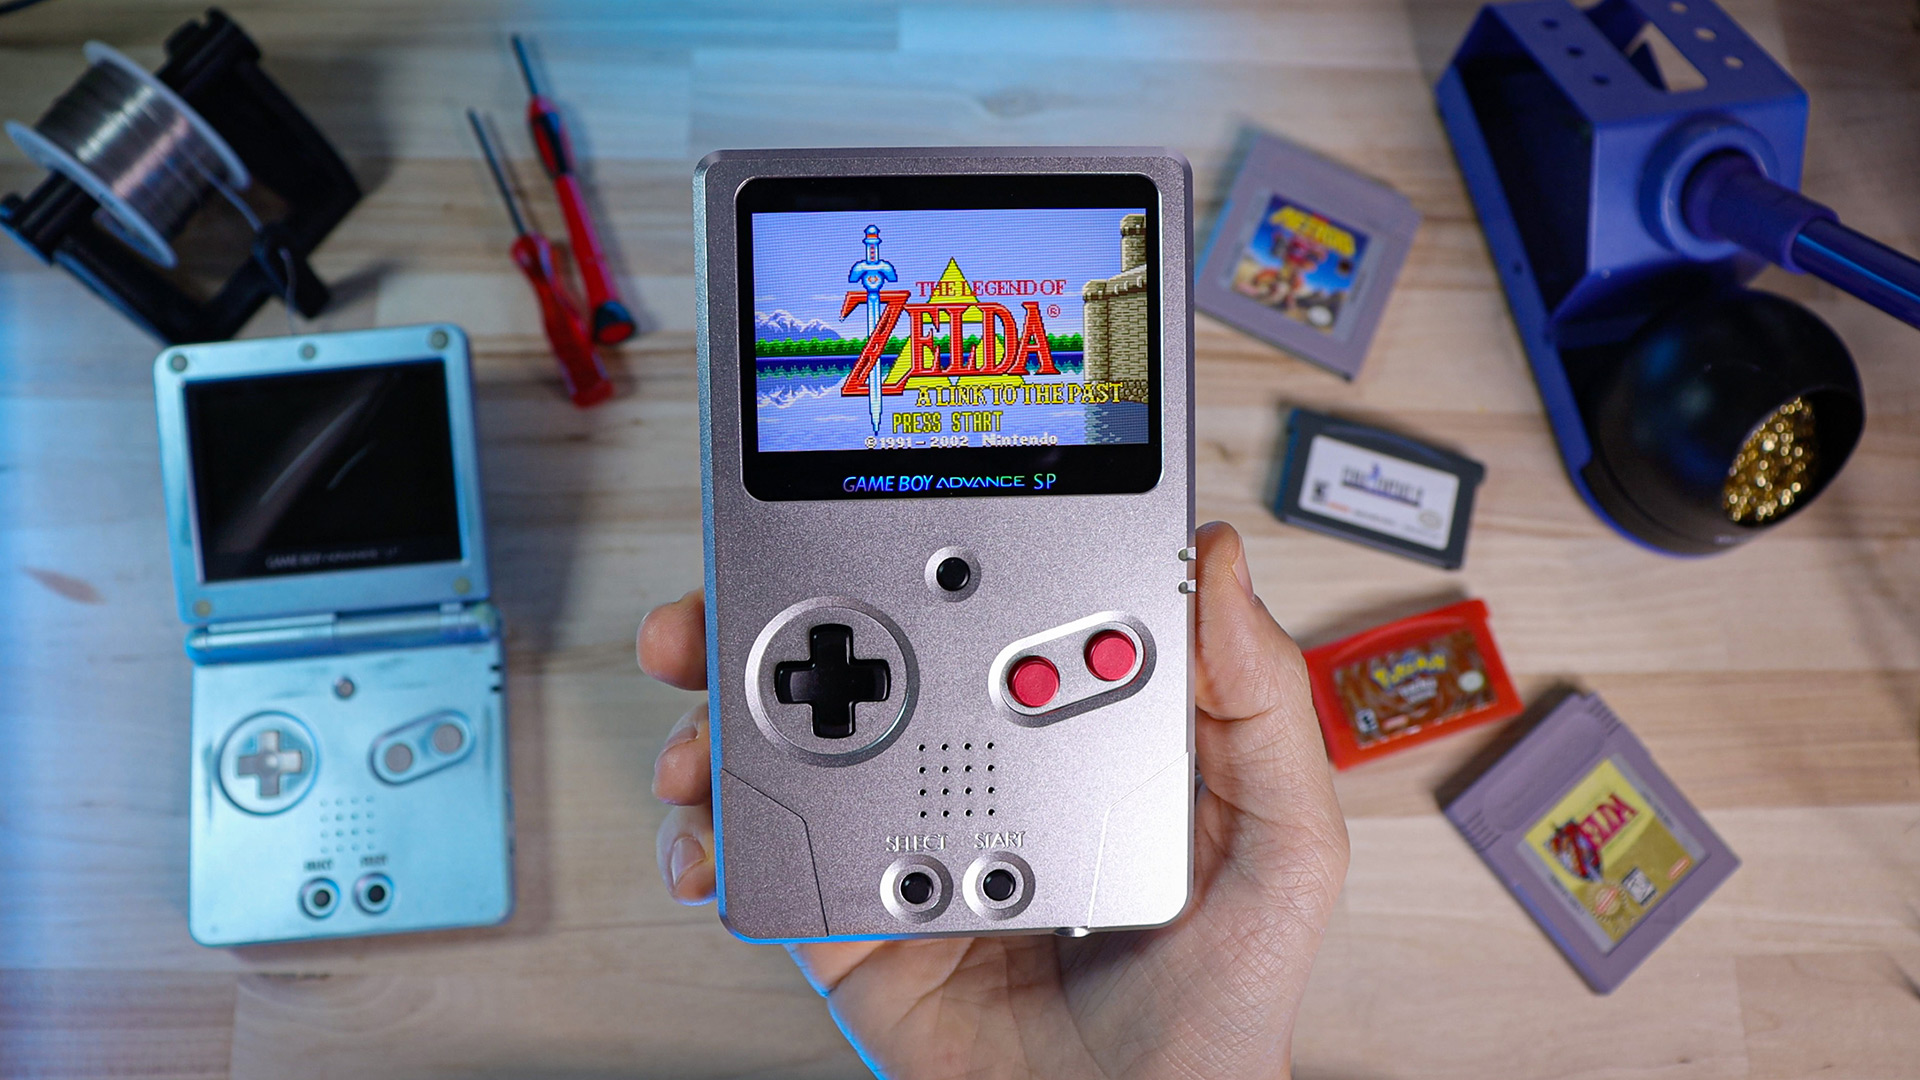 Building the ULTIMATE Game Boy Advance SP with an aluminum shell! - sudomod